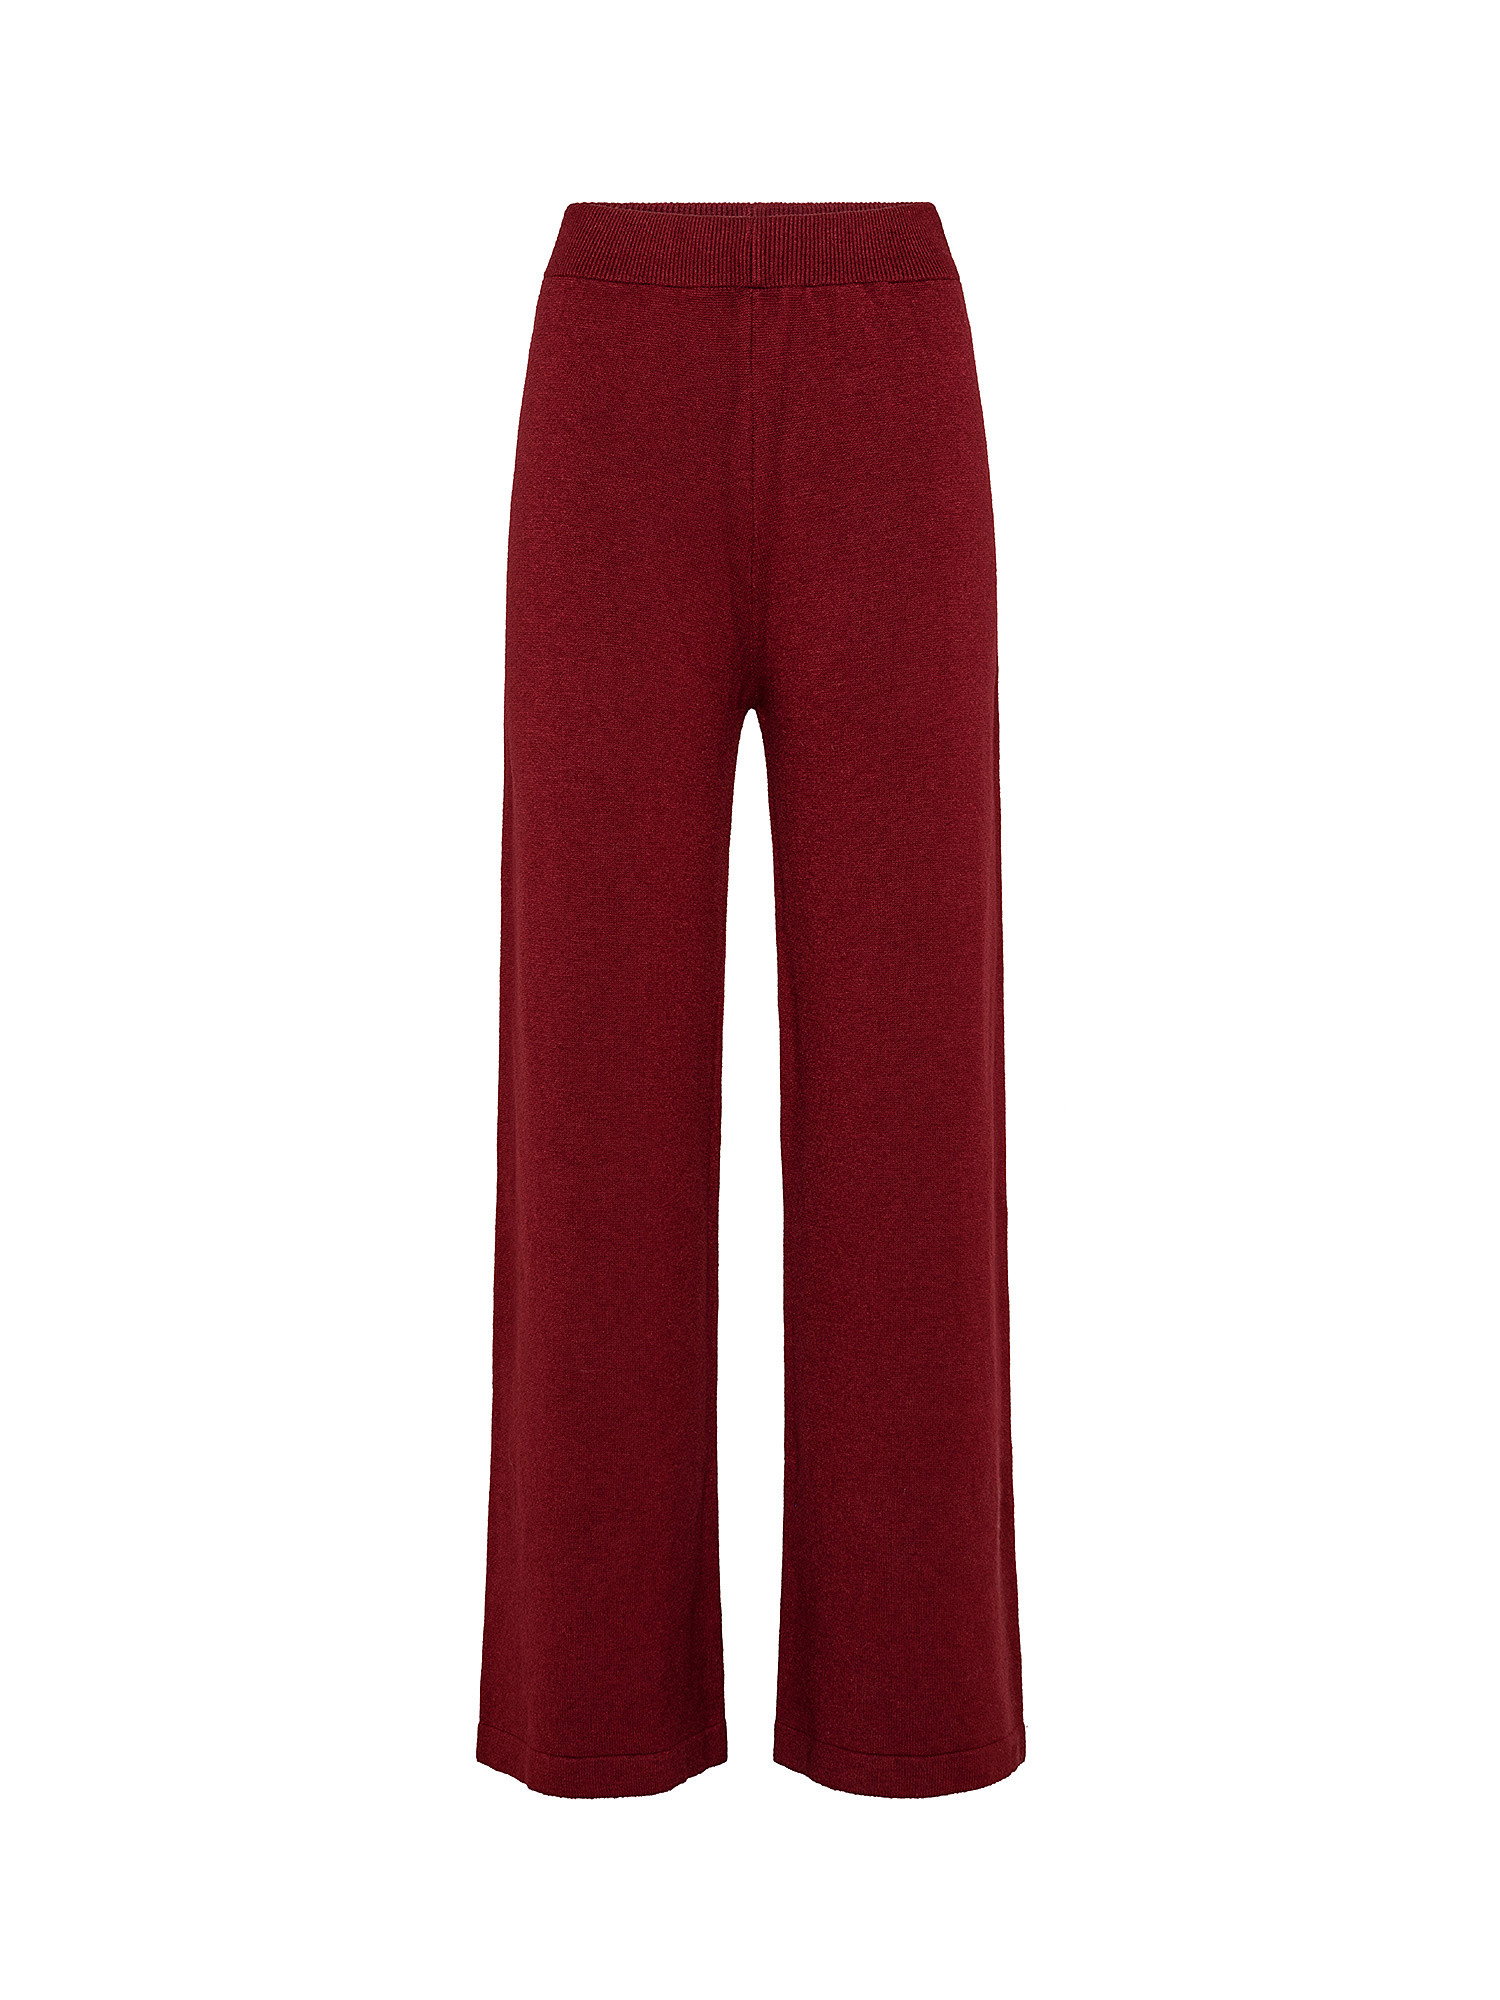 Pantalone in maglia a gamba larga, Rosso scuro, large image number 0